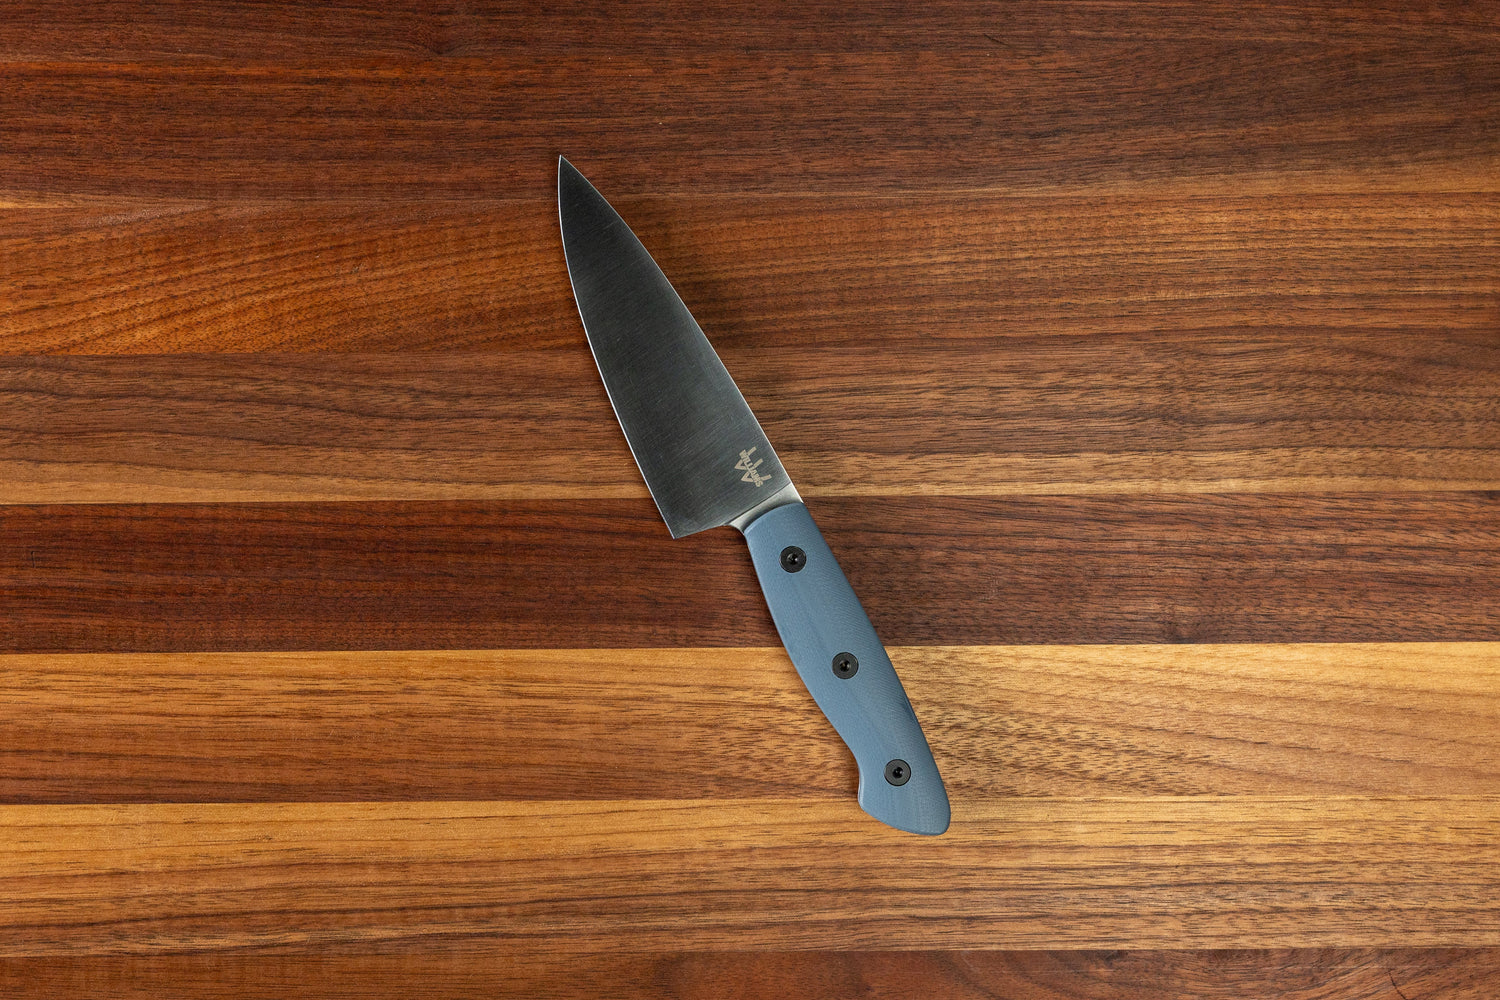 The Petty Knife – Williams Knife